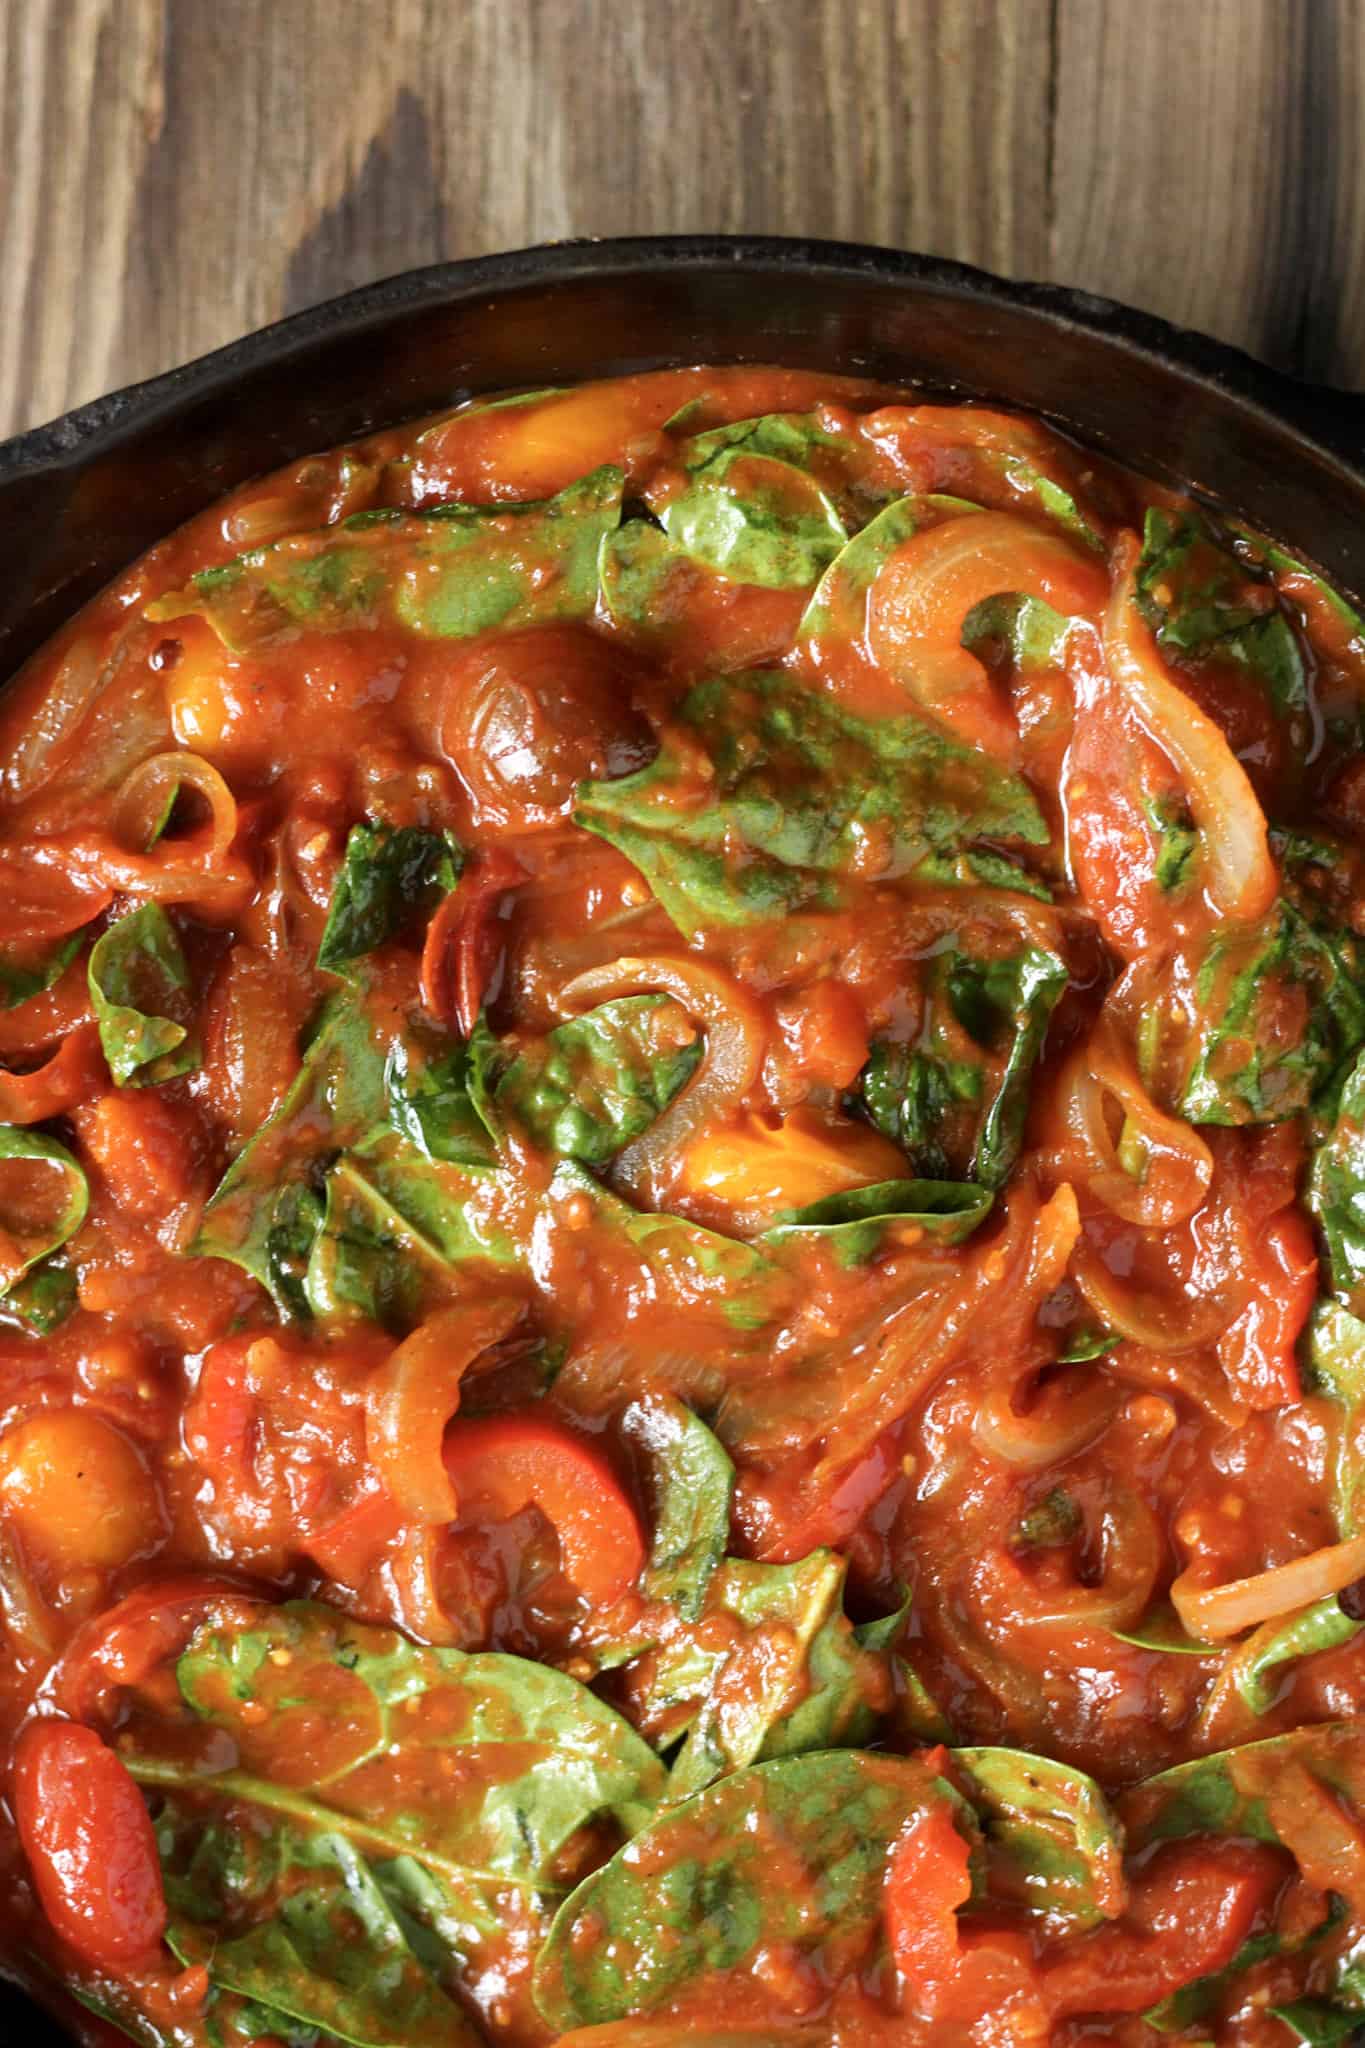 Overhead view of a cast iron skillet with marinara sauce, cooked peppers, onions, and spinach